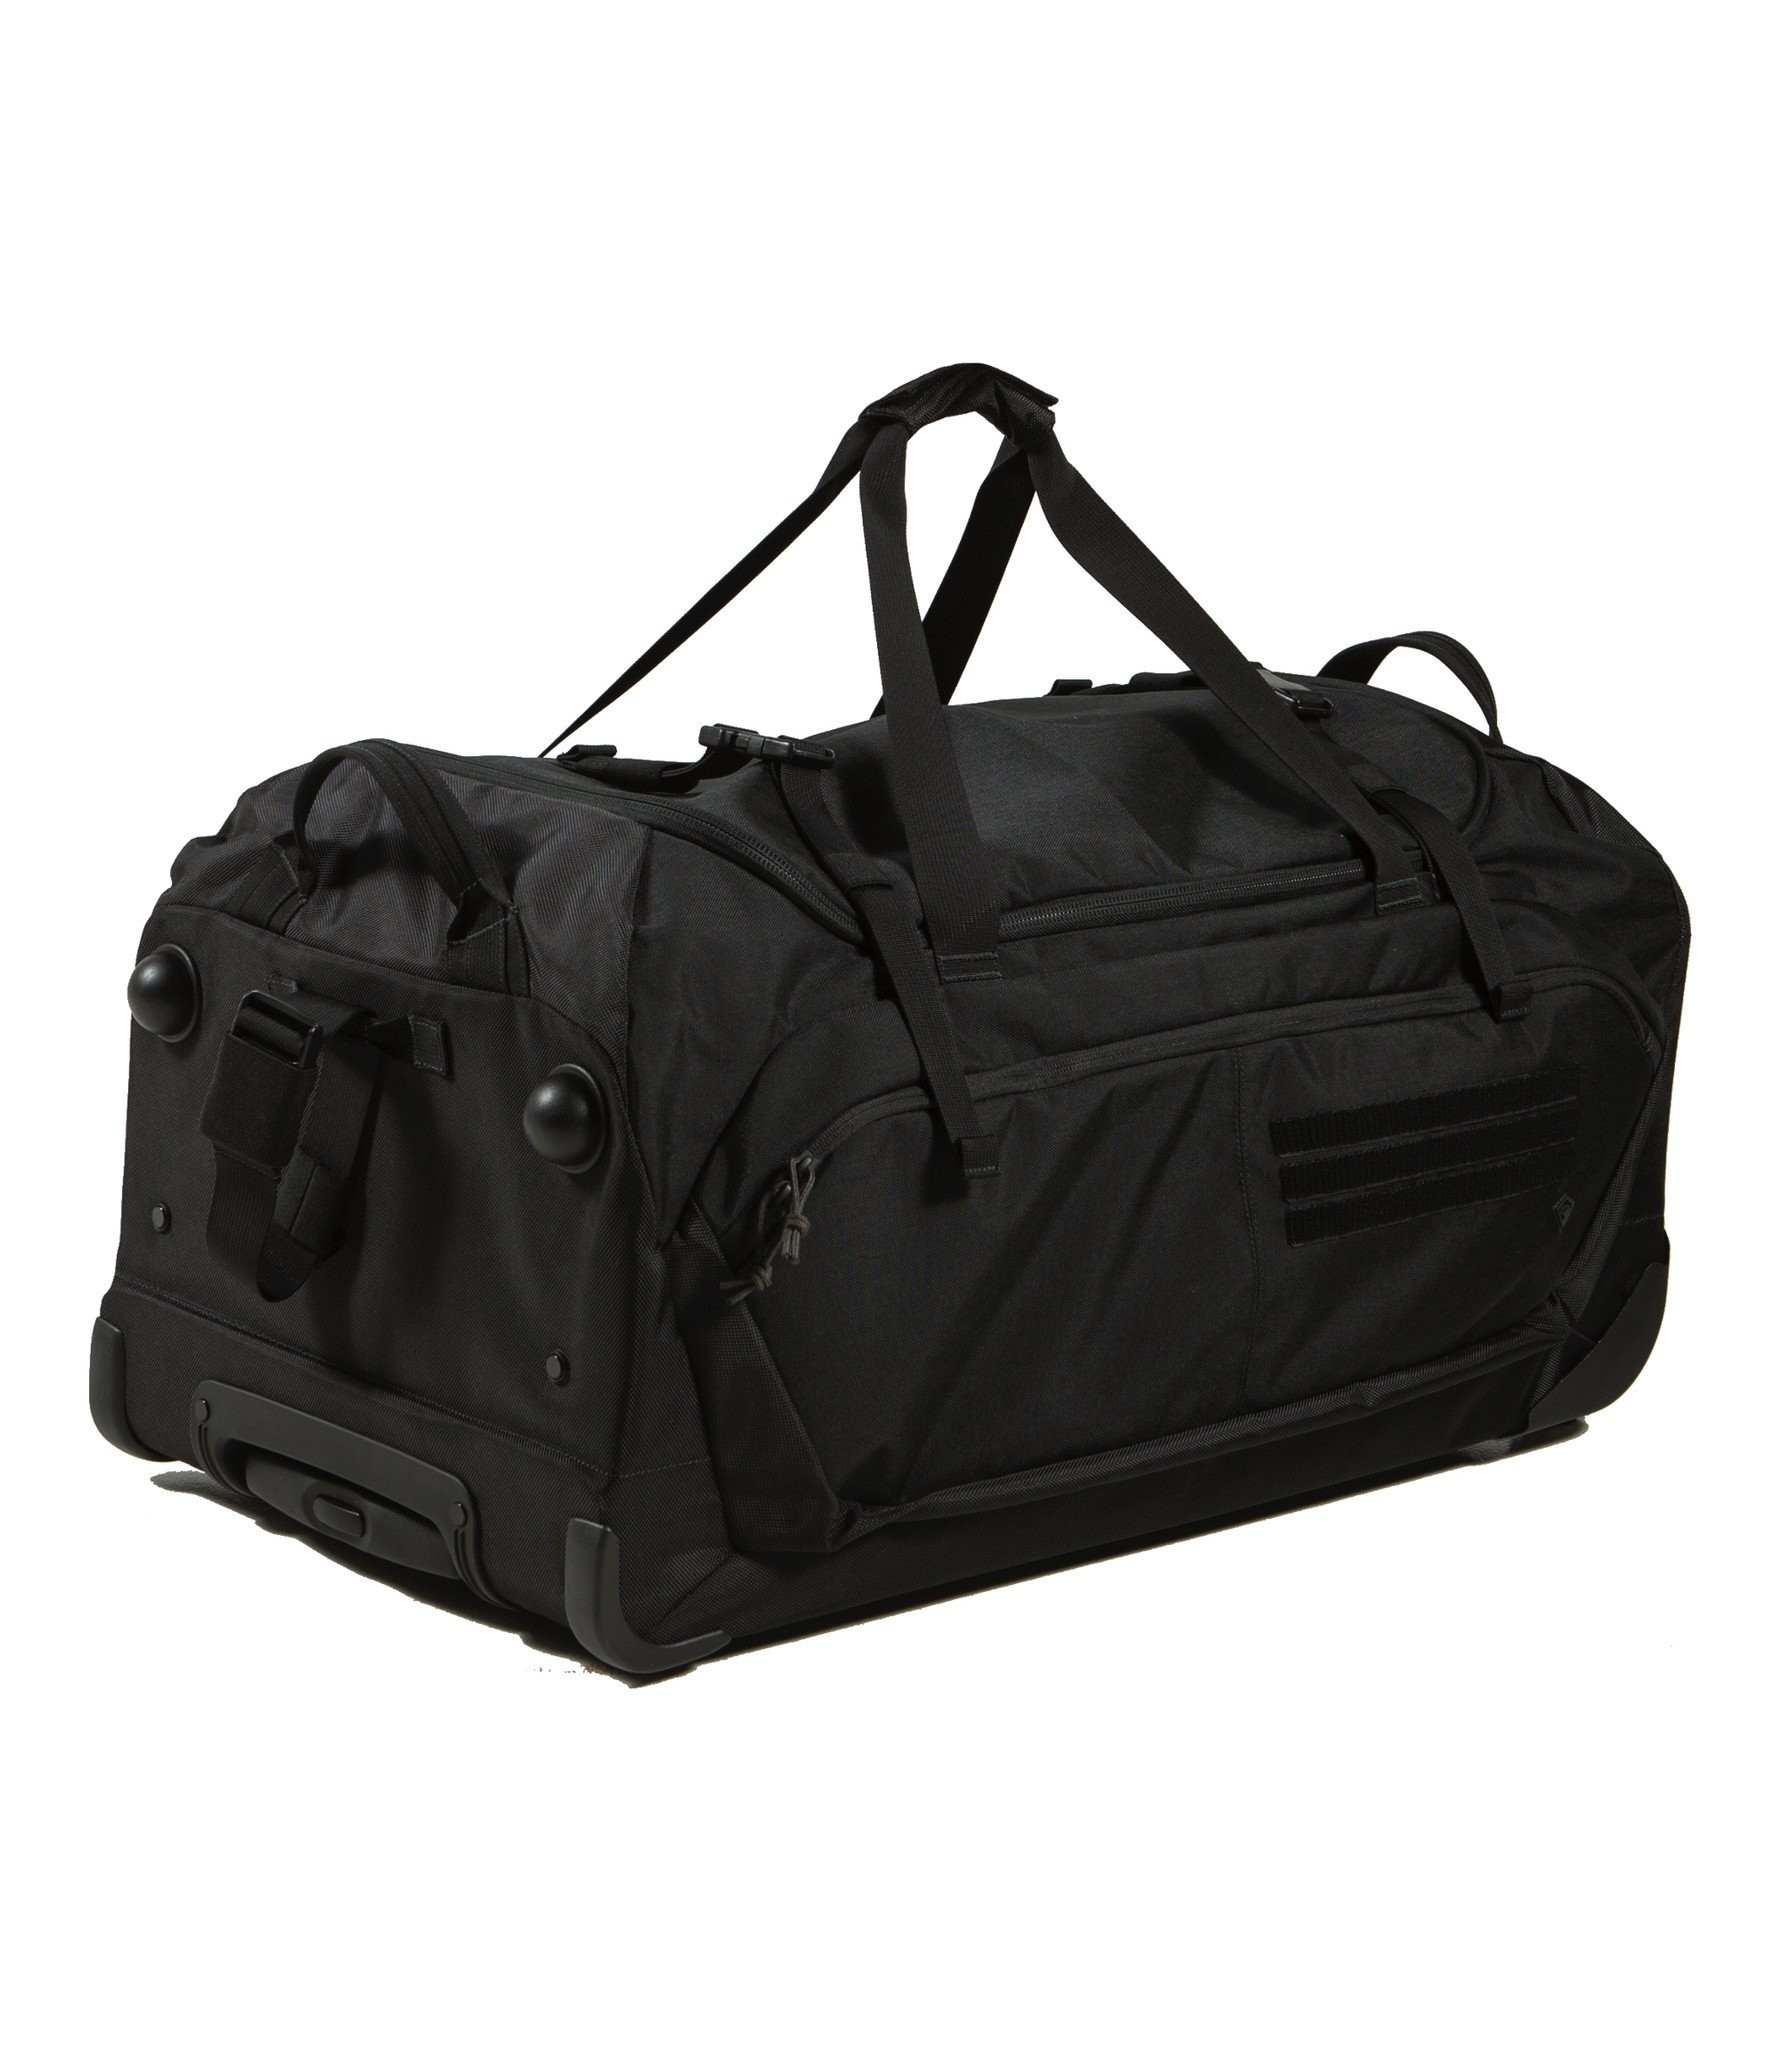 ROLLING DUFFLE BAG: First Tactical Specialist Rolling Duffle